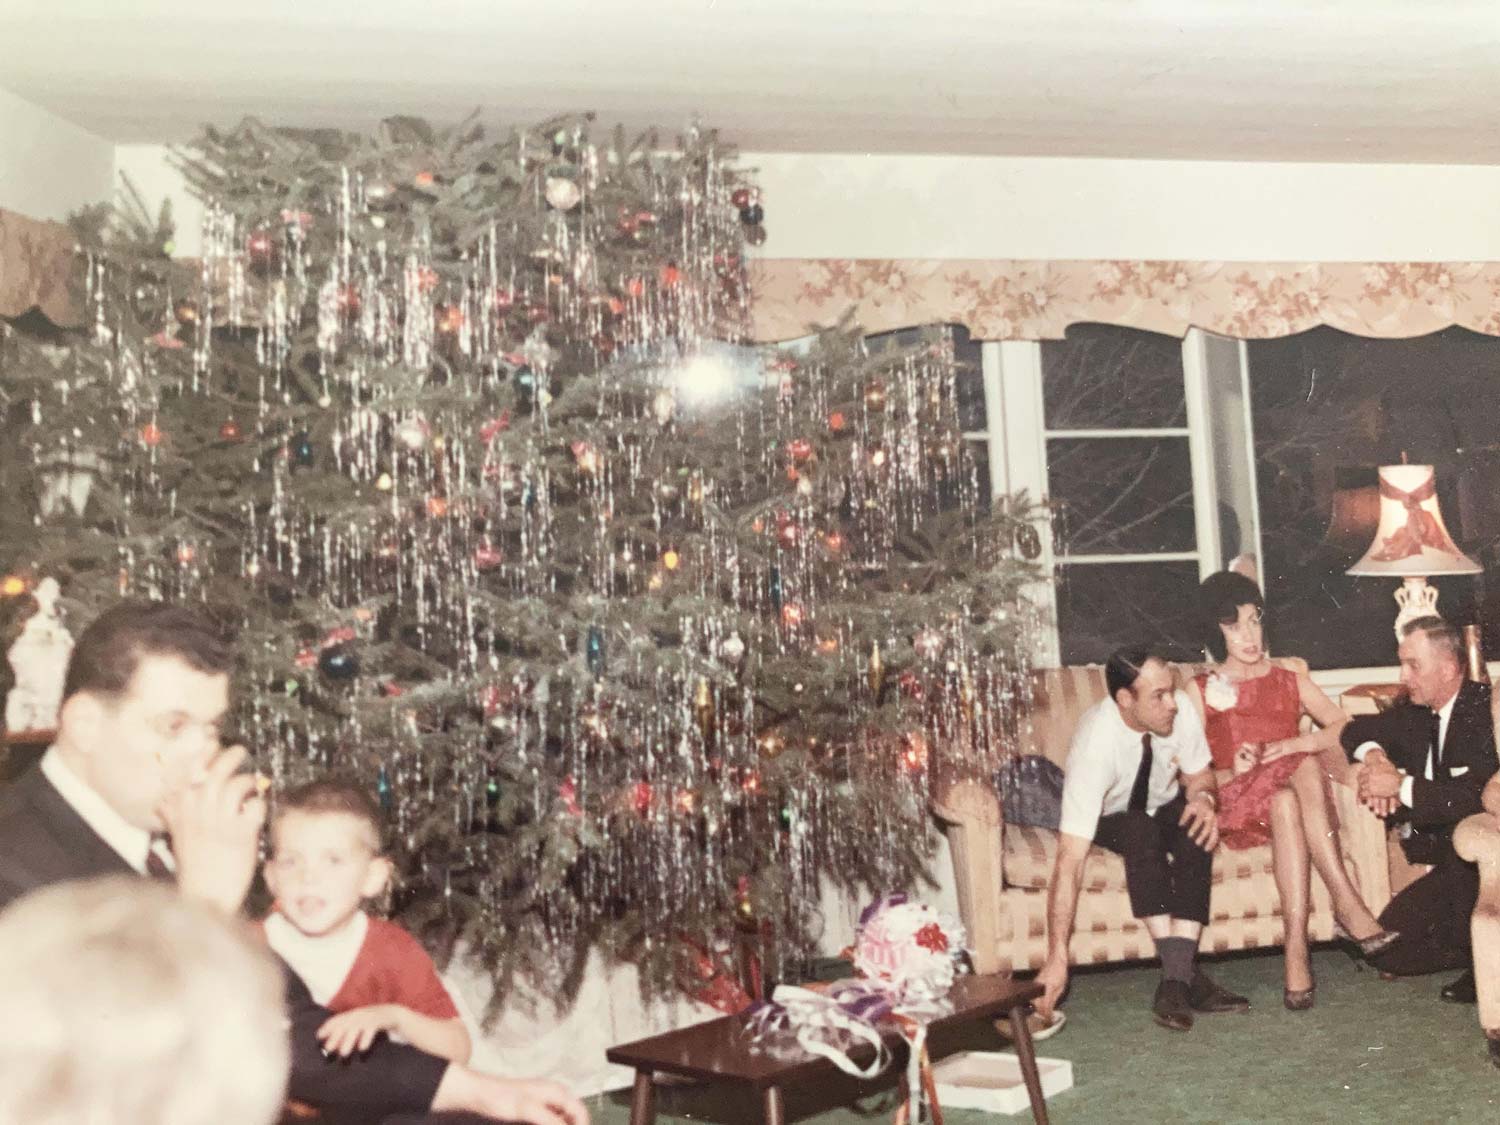 Before the Griswolds there were my grandparents. Christmas 1967